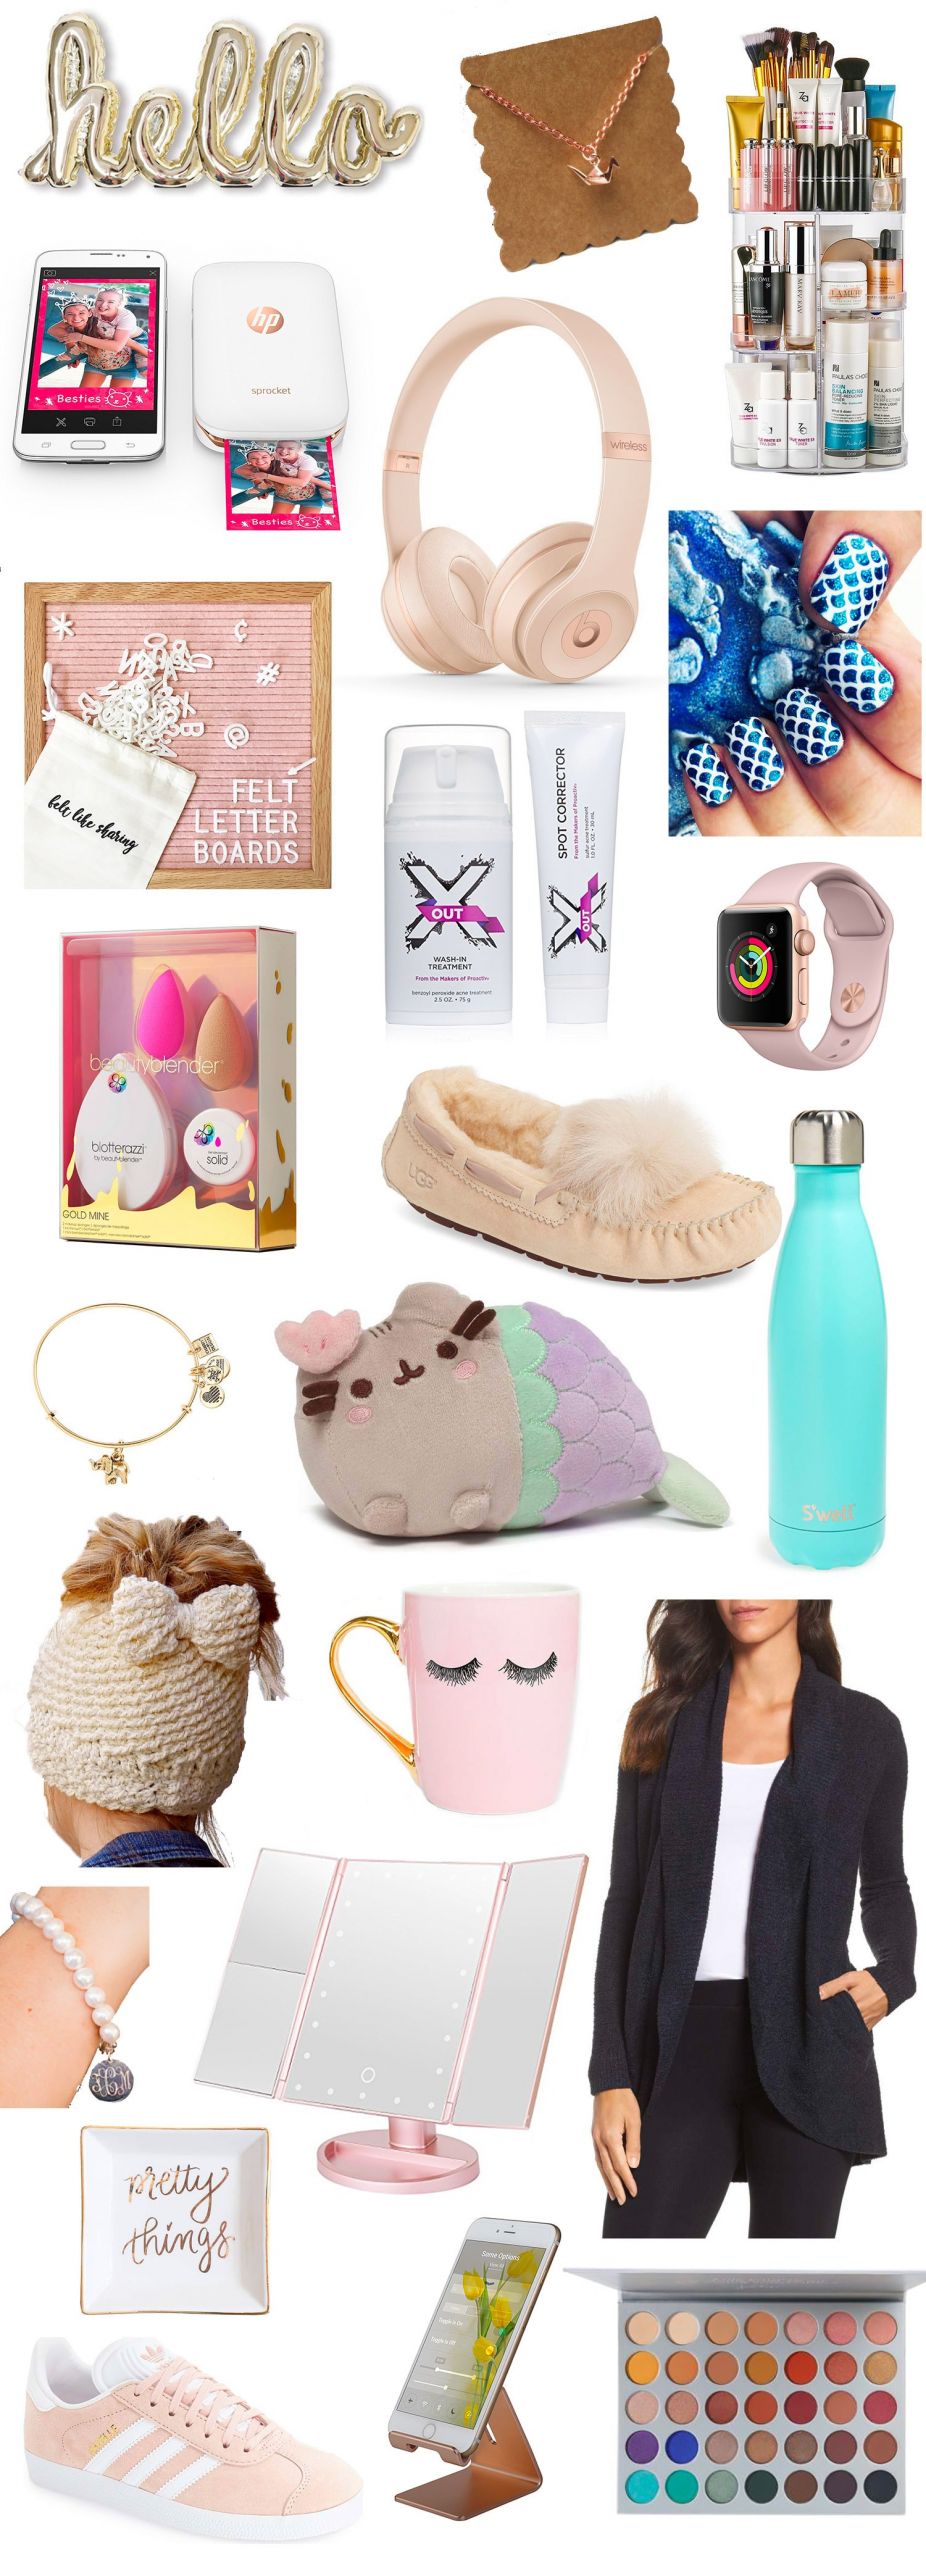 Good Gift Ideas For Girls
 Top Gifts for Teens This Christmas